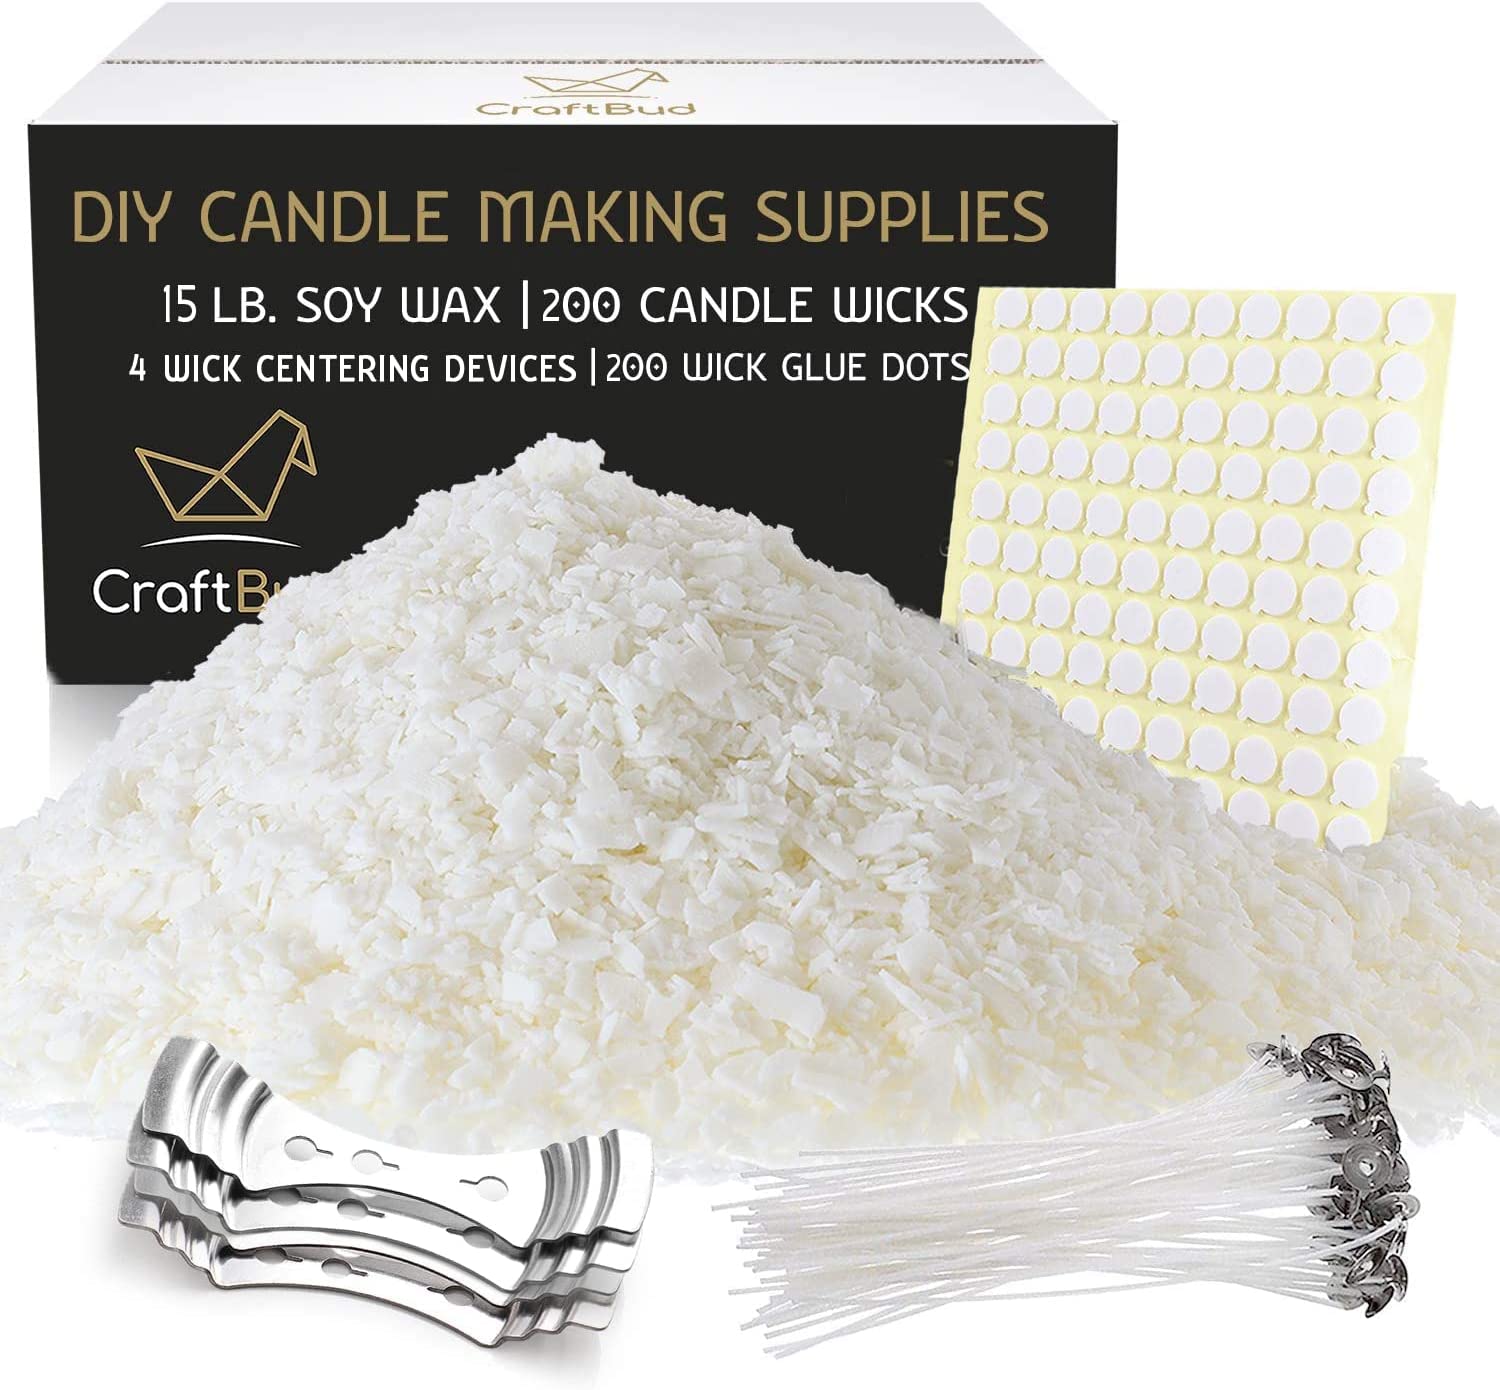 CraftBud Soy Candle Wax for Candle Making, Natural Soy Wax for Candle Making 15 lb Bag with Supplies, 100 Cotton Candle Wicks, 100 Wick Stickers, 2 Centering Devices – 15 Pounds Soy Wax Flakes